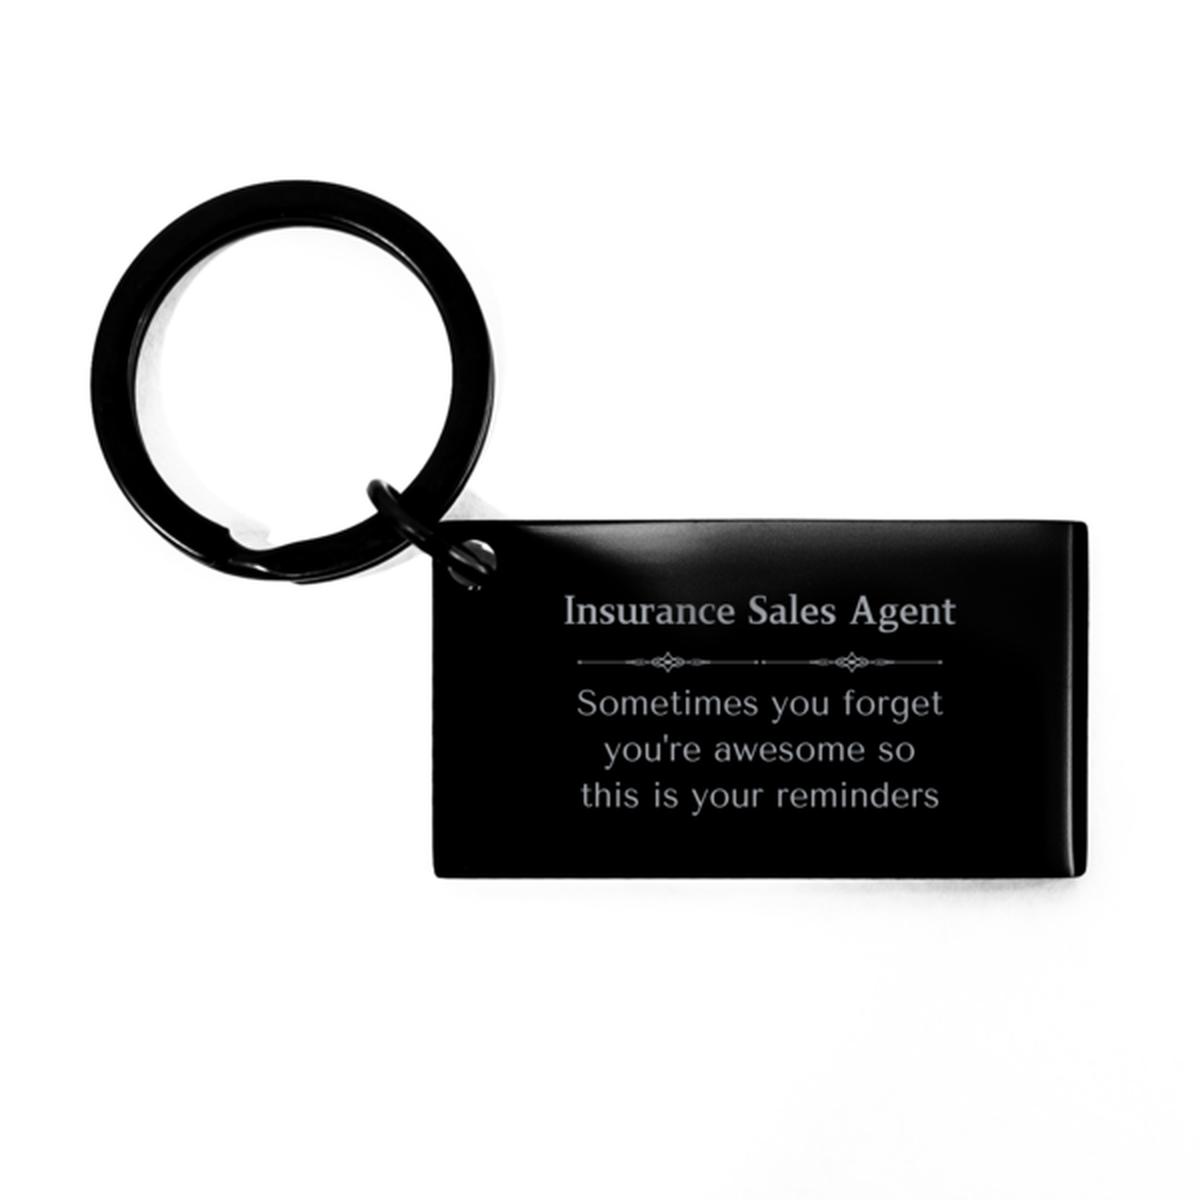 Sentimental Insurance Sales Agent Keychain, Missionary Sometimes you forget you're awesome so this is your reminders, Graduation Christmas Birthday Gifts for Insurance Sales Agent, Men, Women, Coworkers